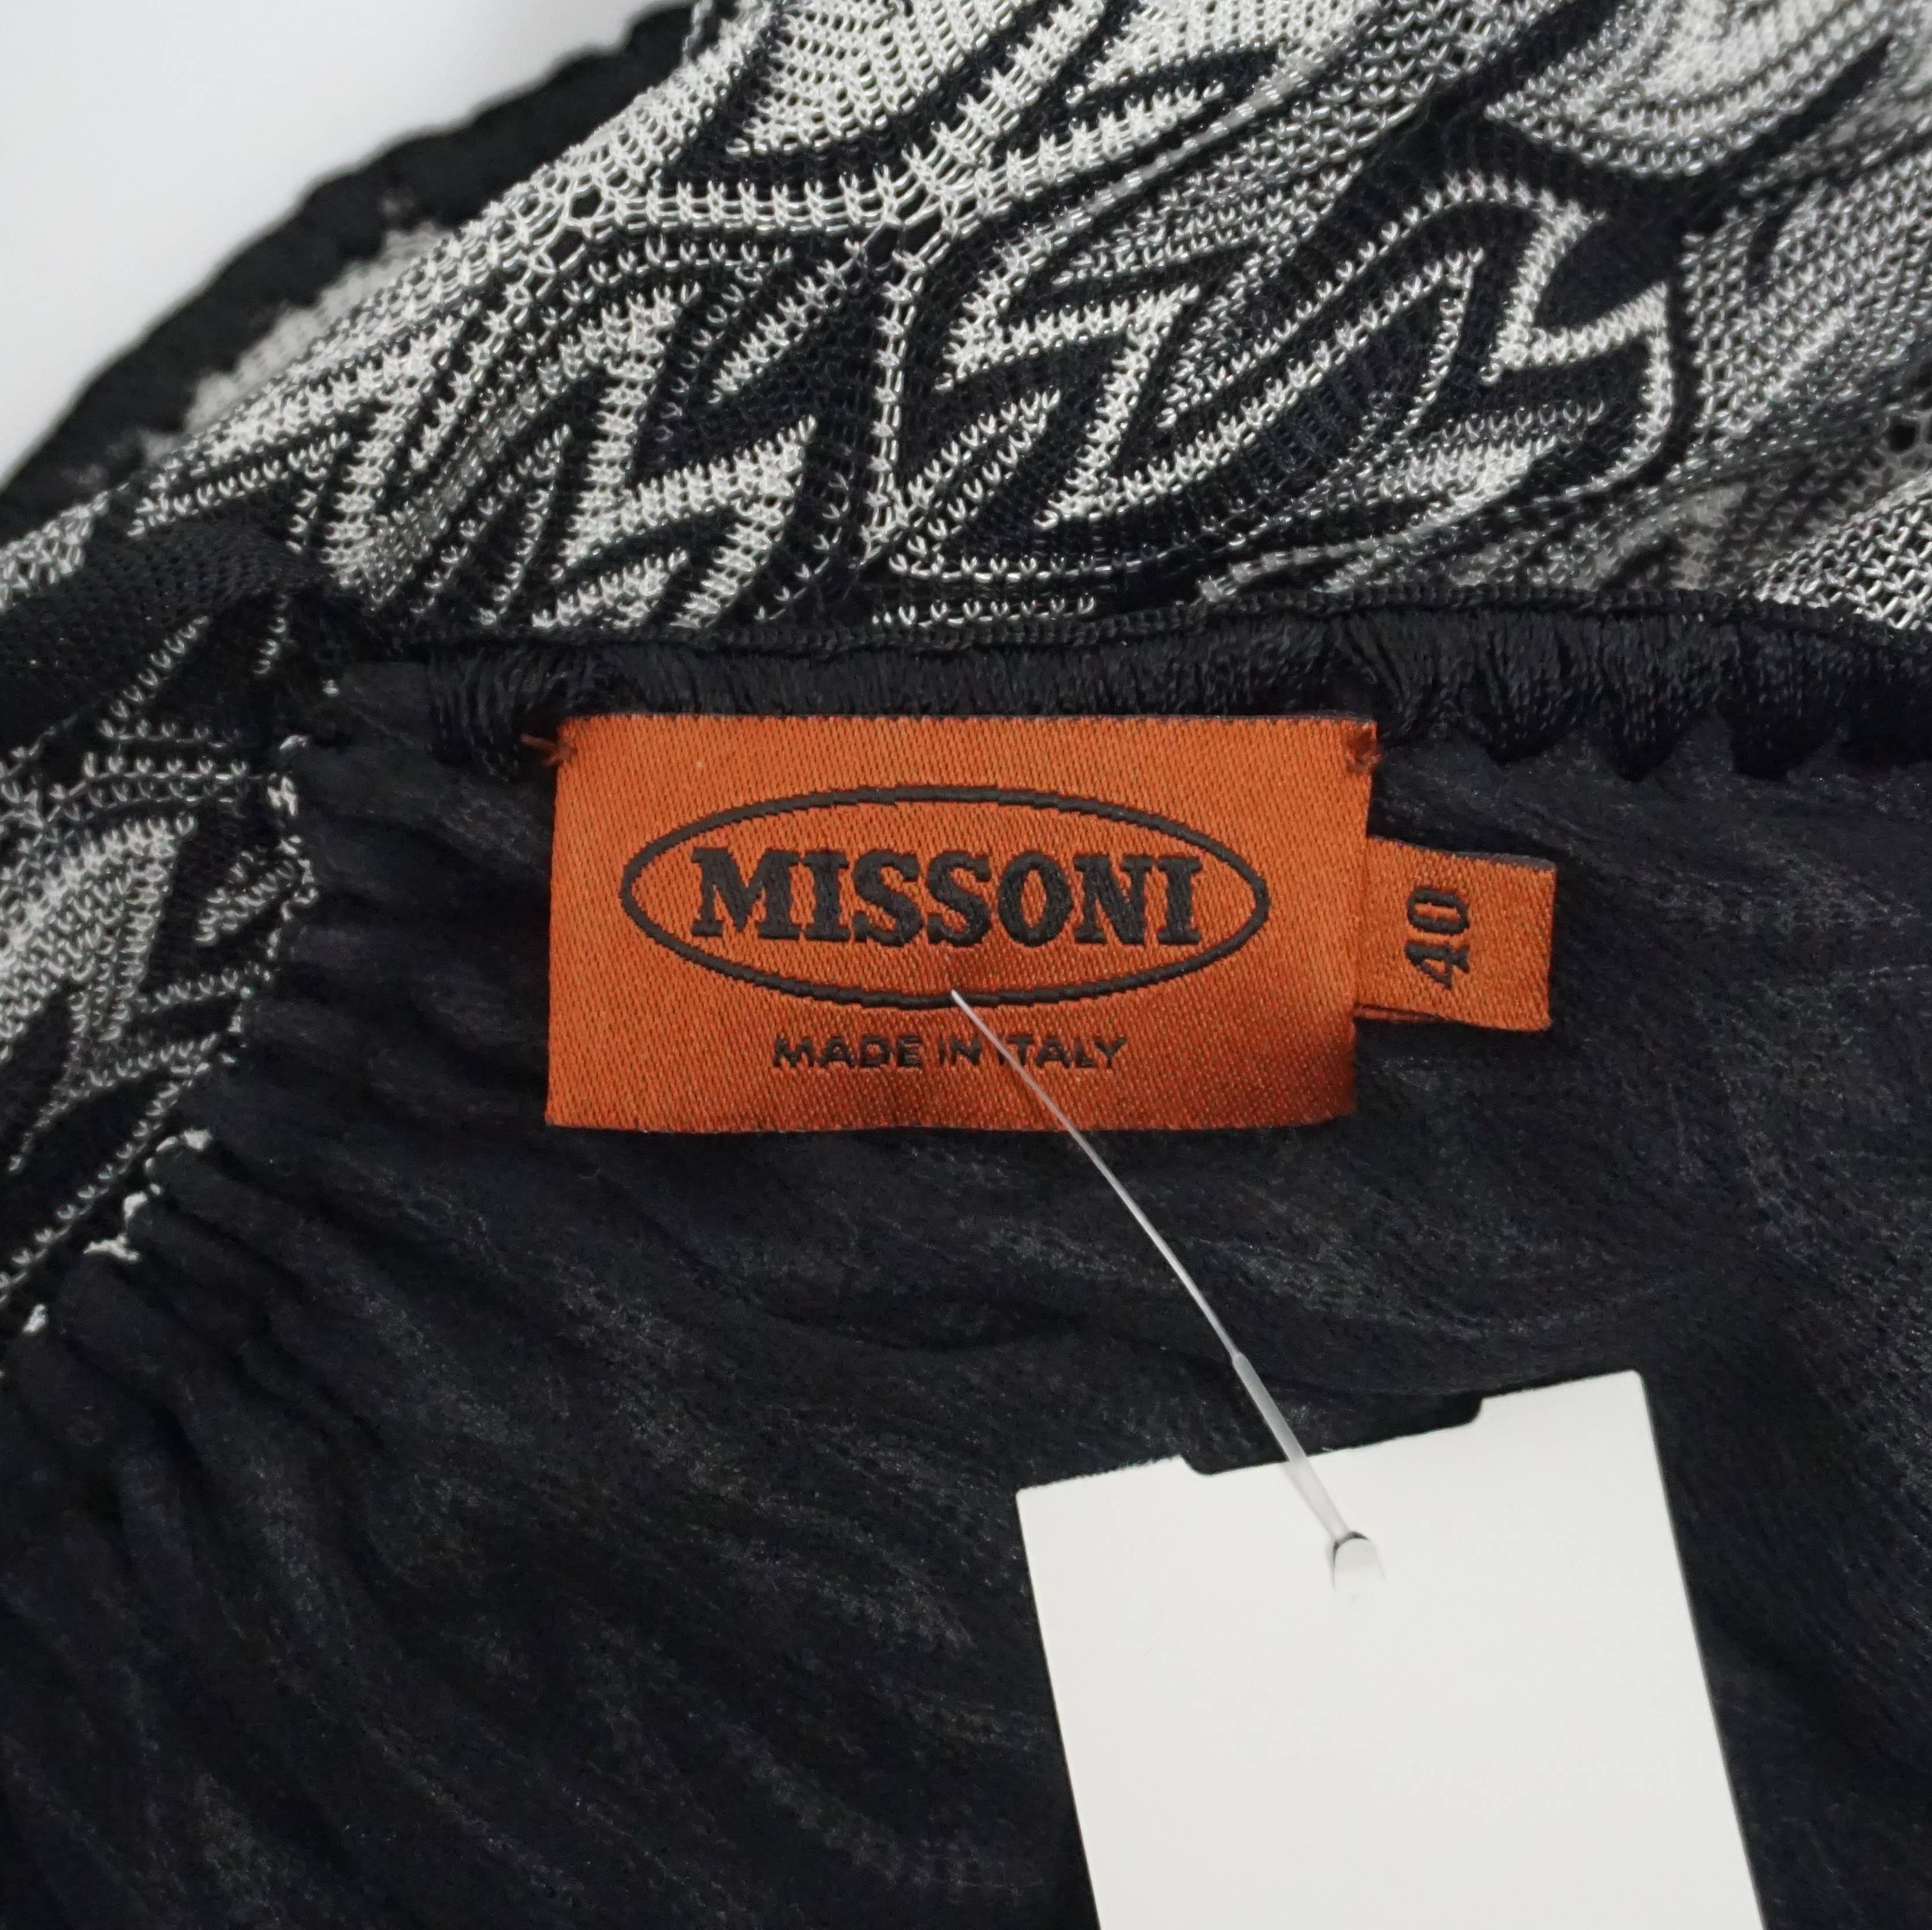 Missoni Black and White Knit Top and Pants Set - 40 1